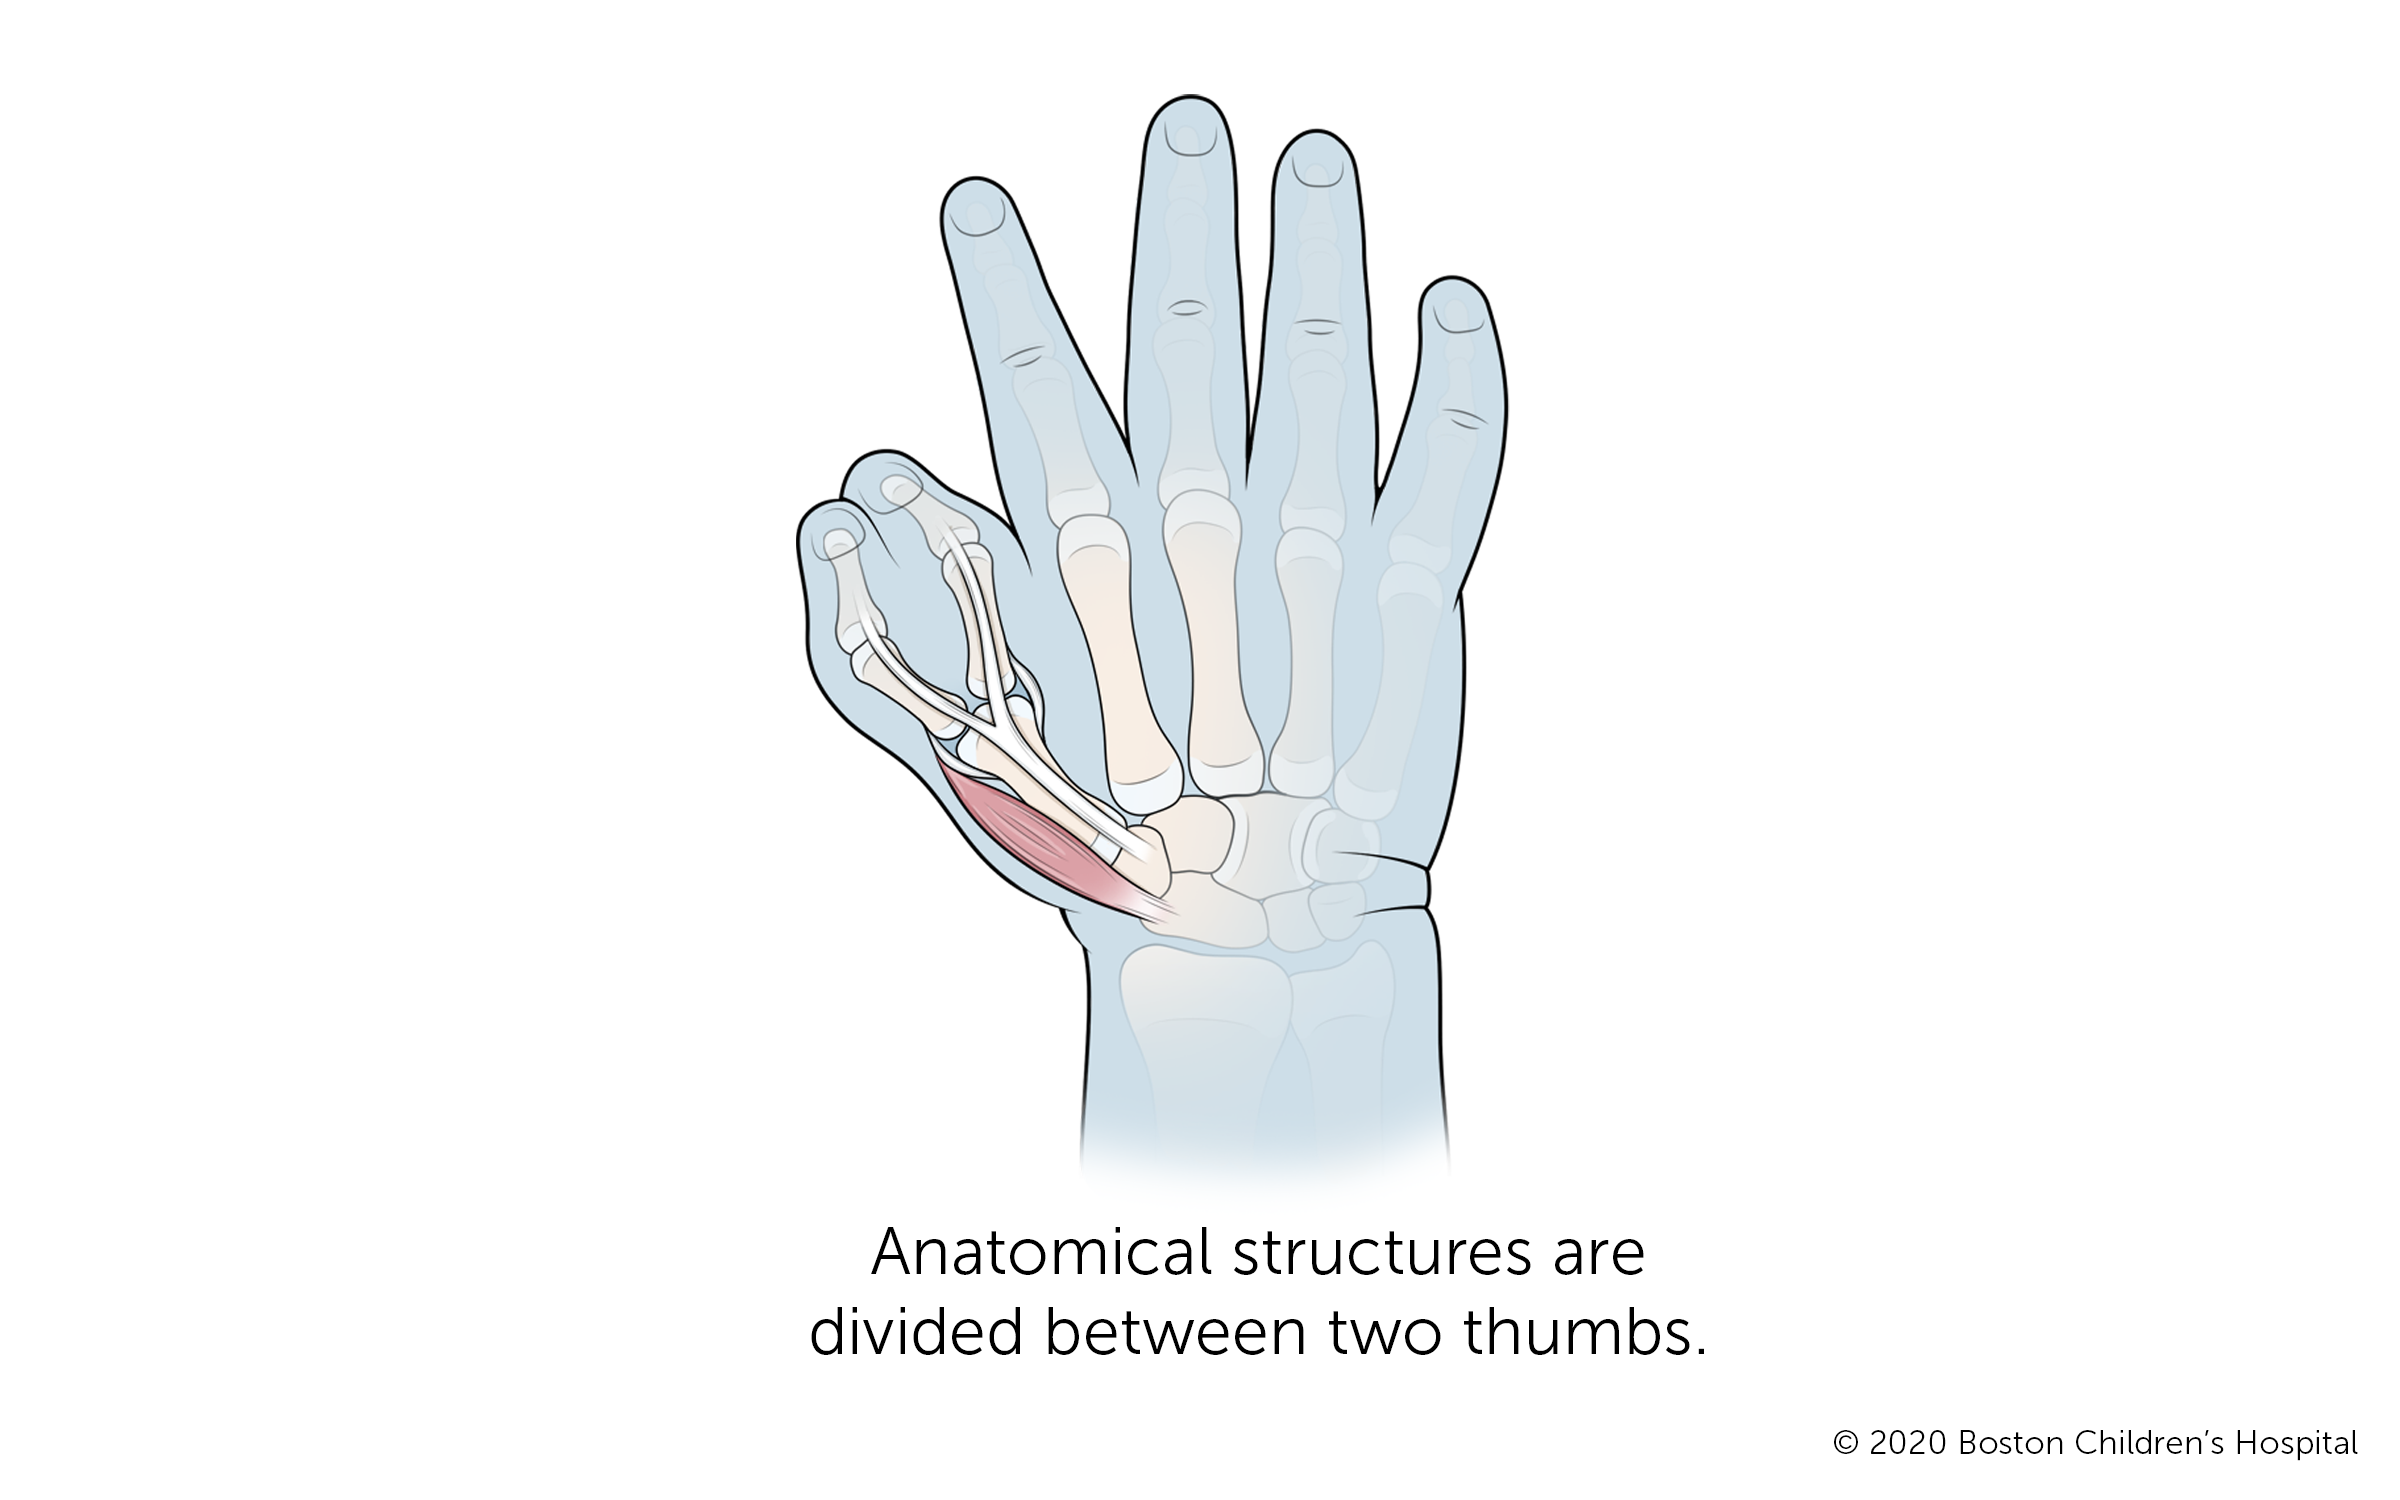 A hand with a duplicate thumb in which the anatomical structures are divided between two thumbs. The thumb bone branches out at the thumb joint into two bones connected by skin.